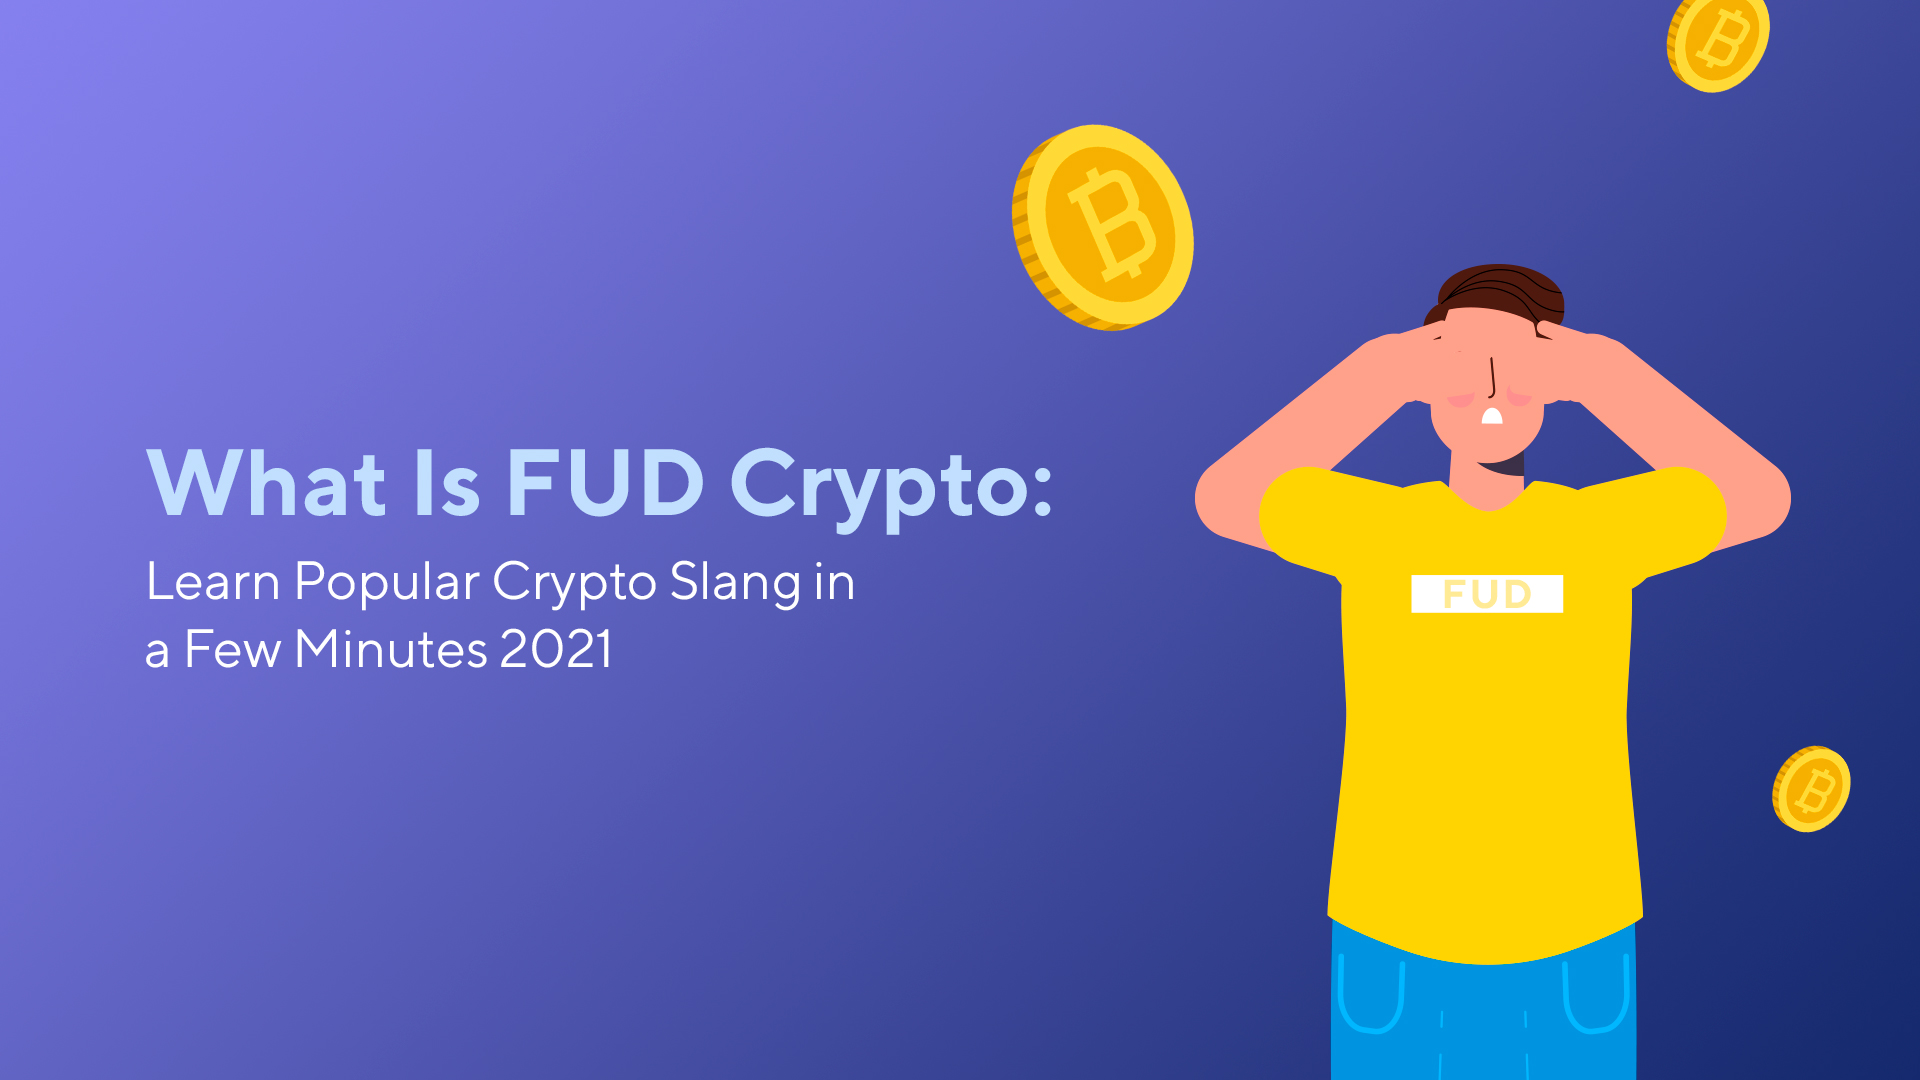 What Is FUD Crypto: Learn Popular Crypto Slang in a Few Minutes 2021